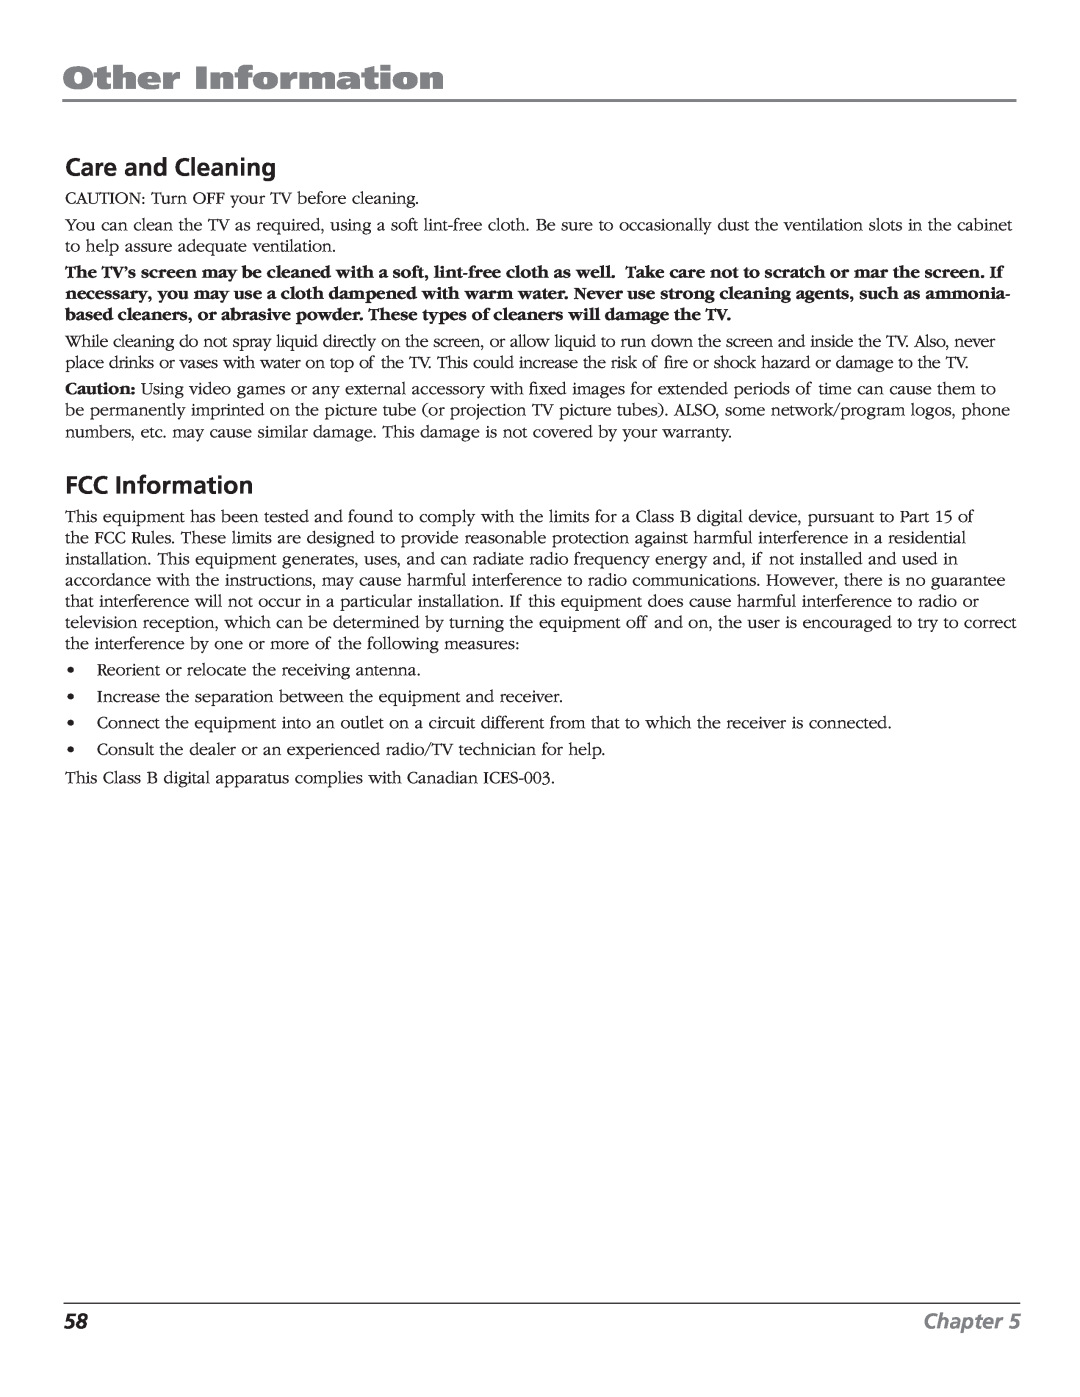 RCA R52WH79 manual Care and Cleaning, FCC Information, Other Information, Chapter 